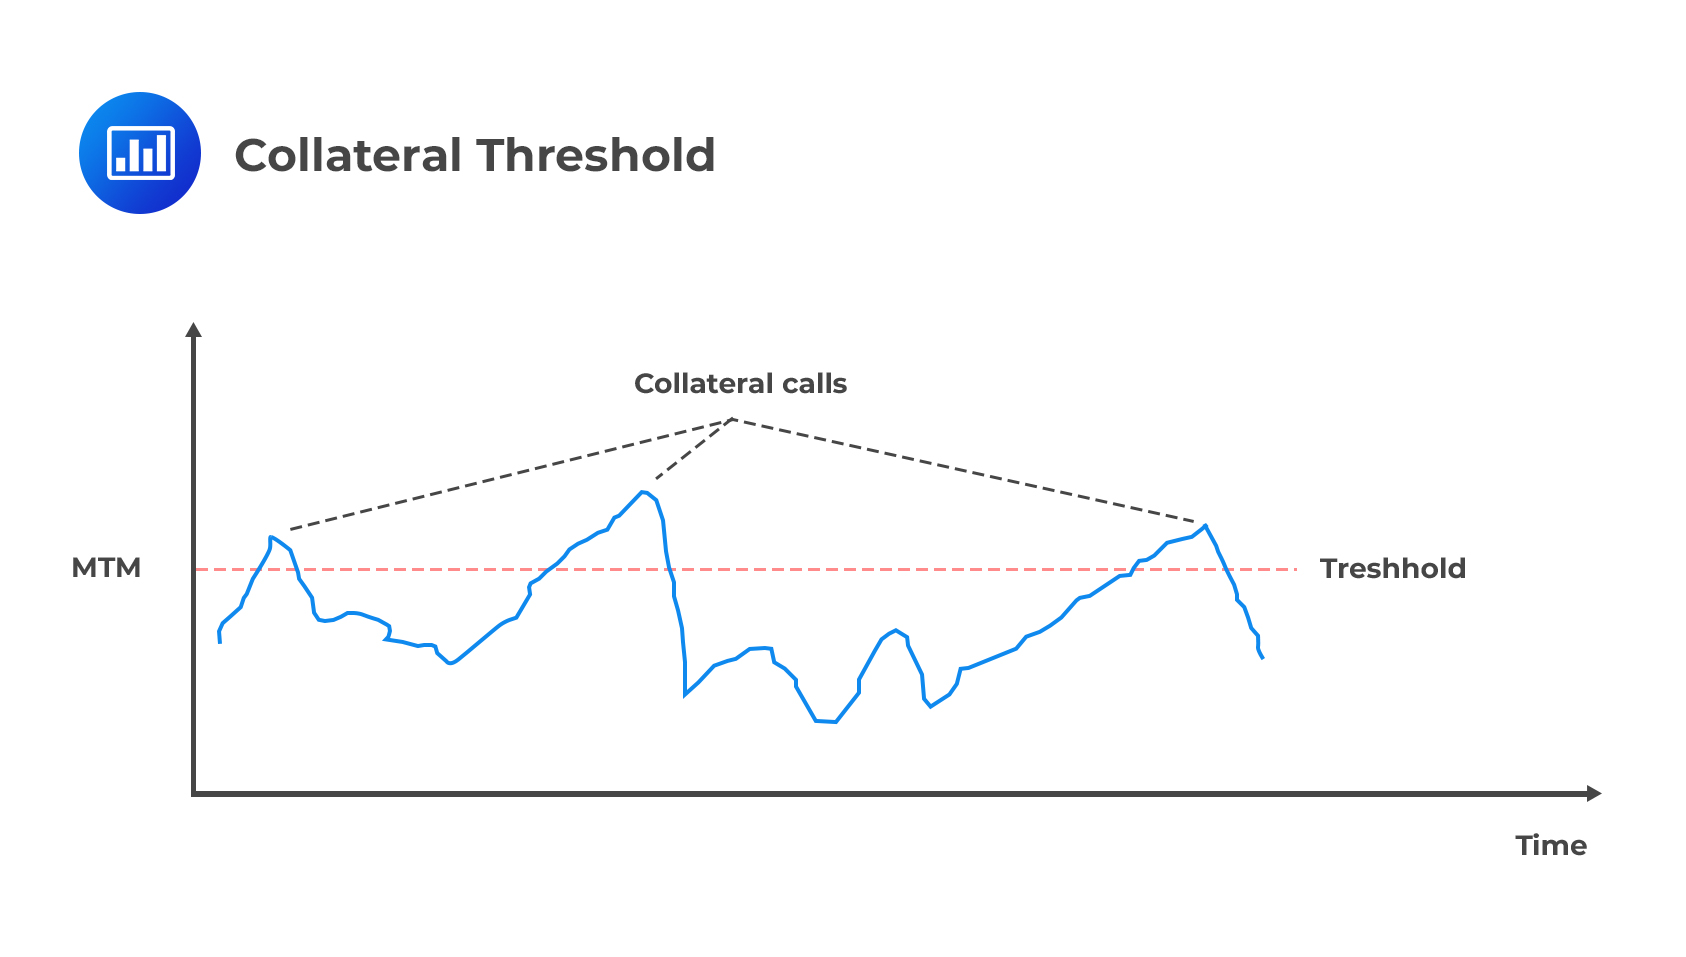 Collateral Threshold